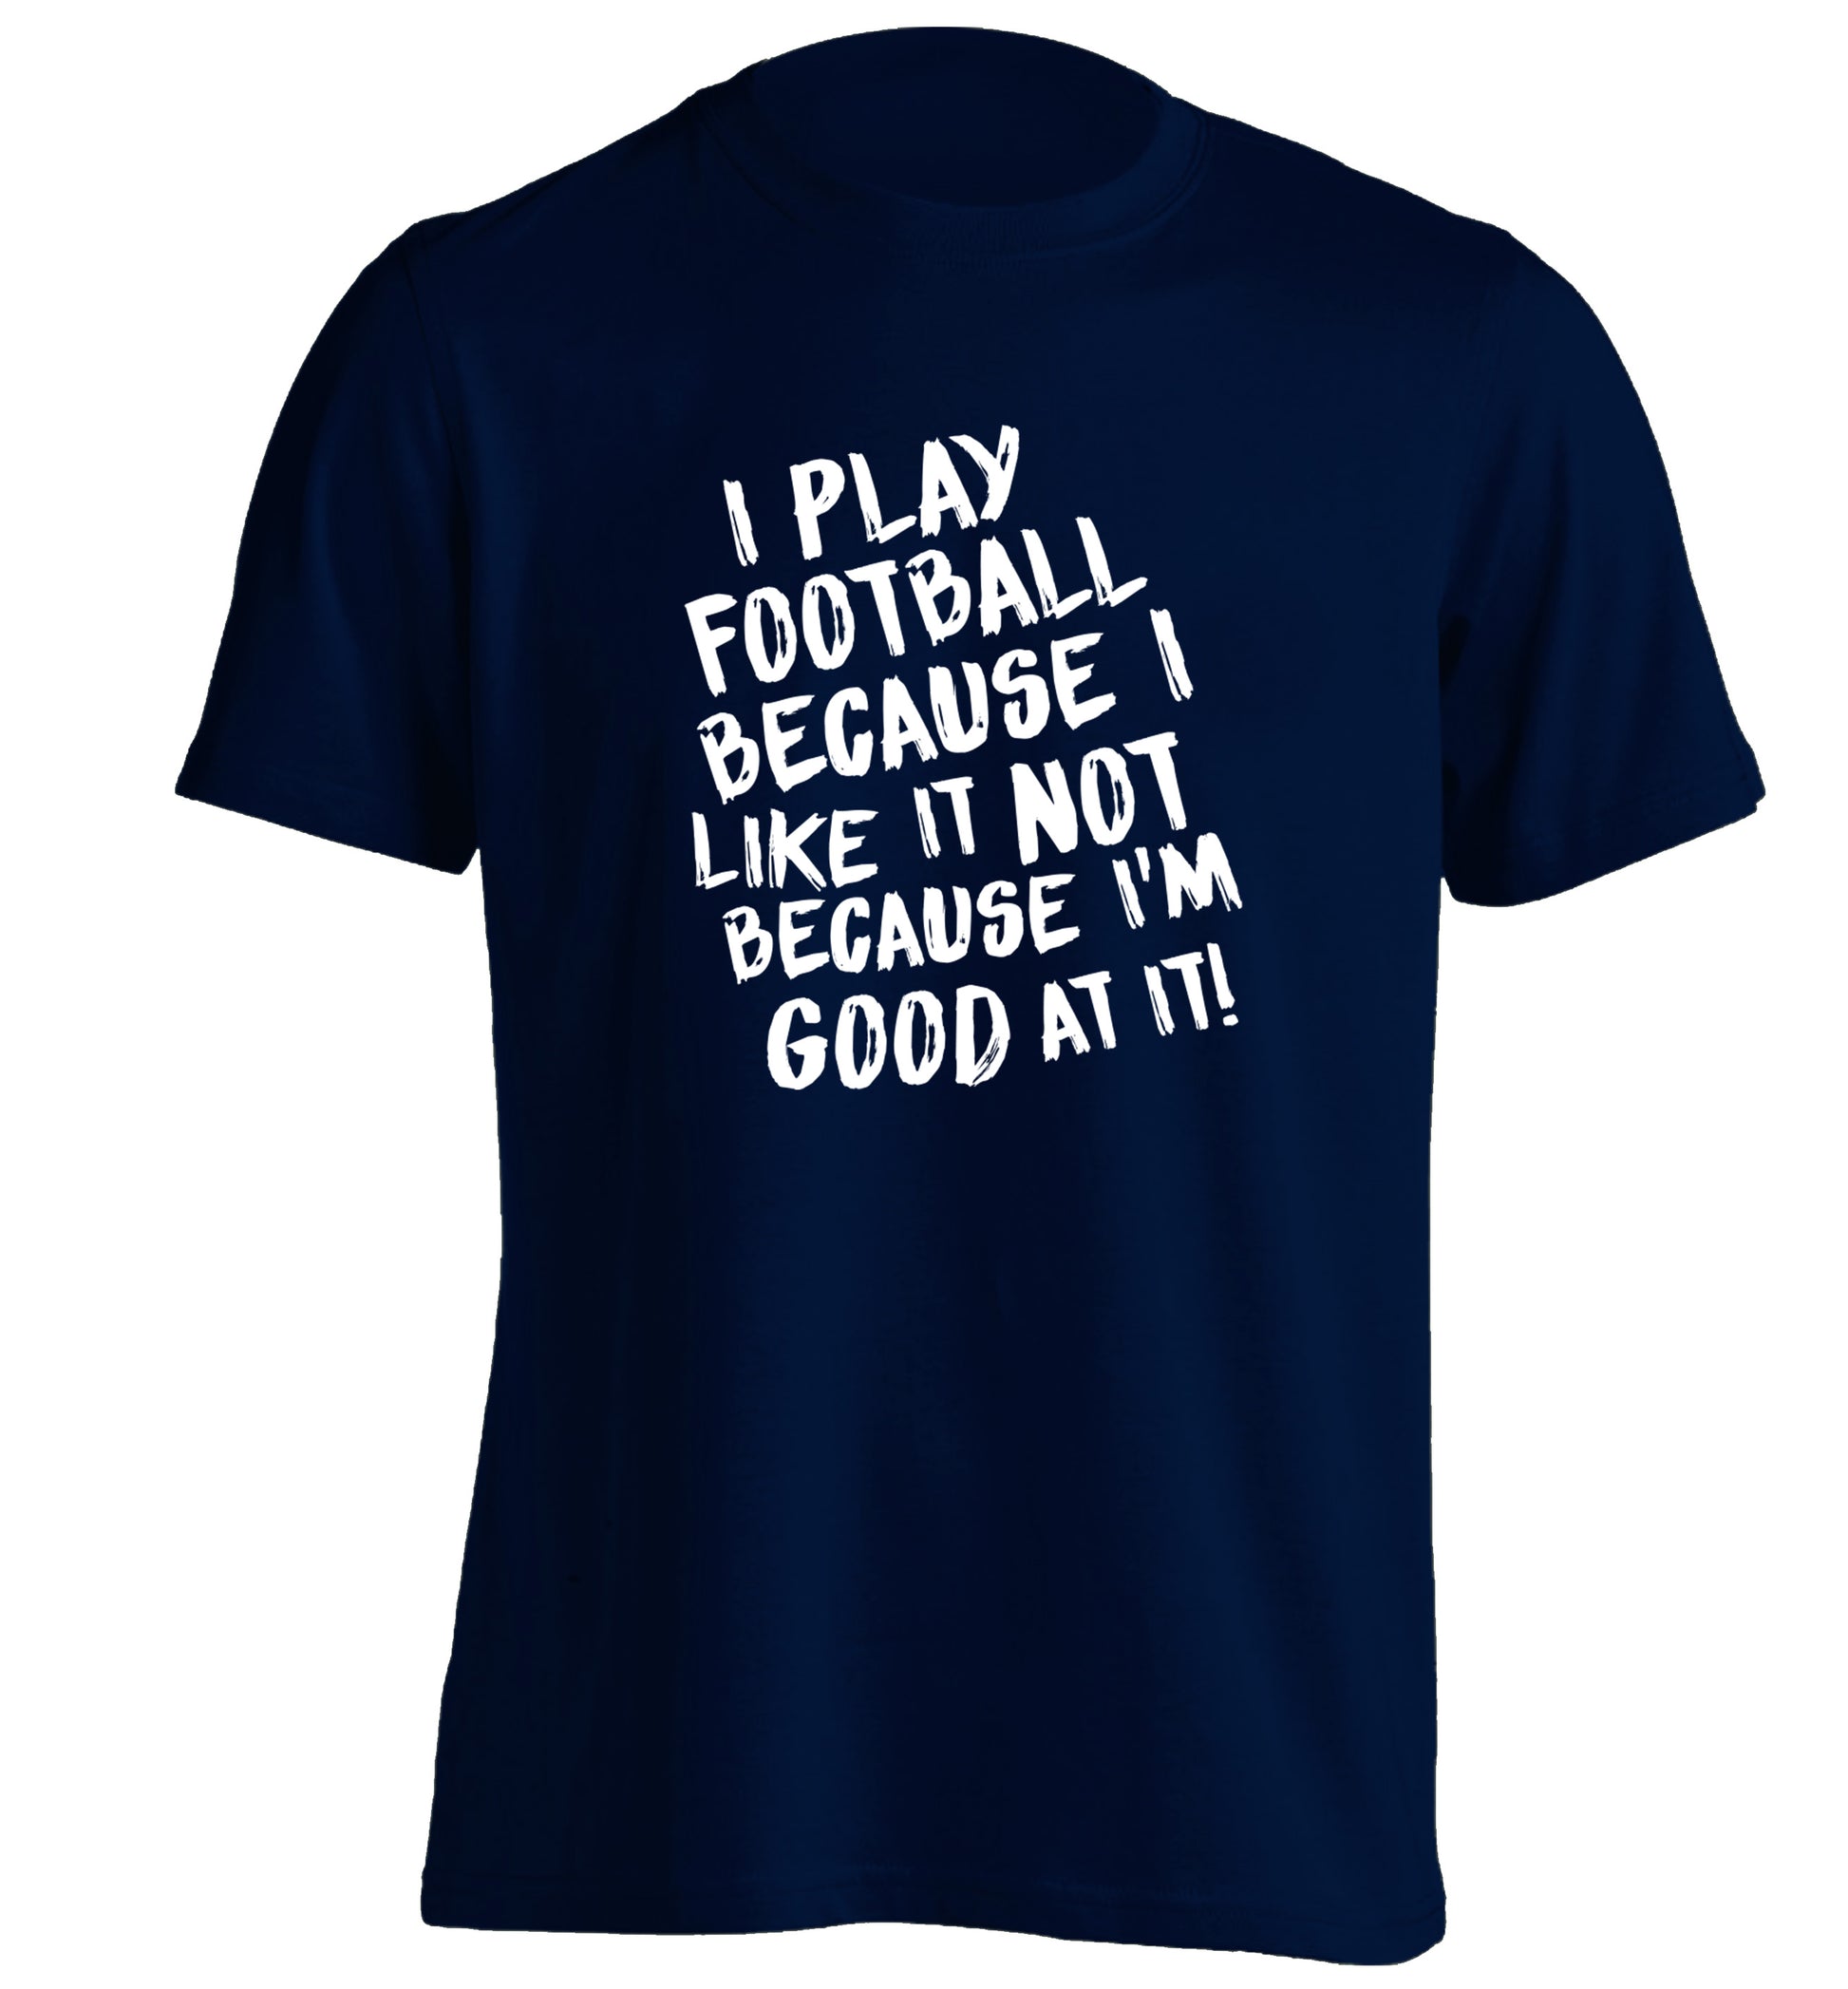 I play football because I like it not because I'm good at it adults unisexnavy Tshirt 2XL